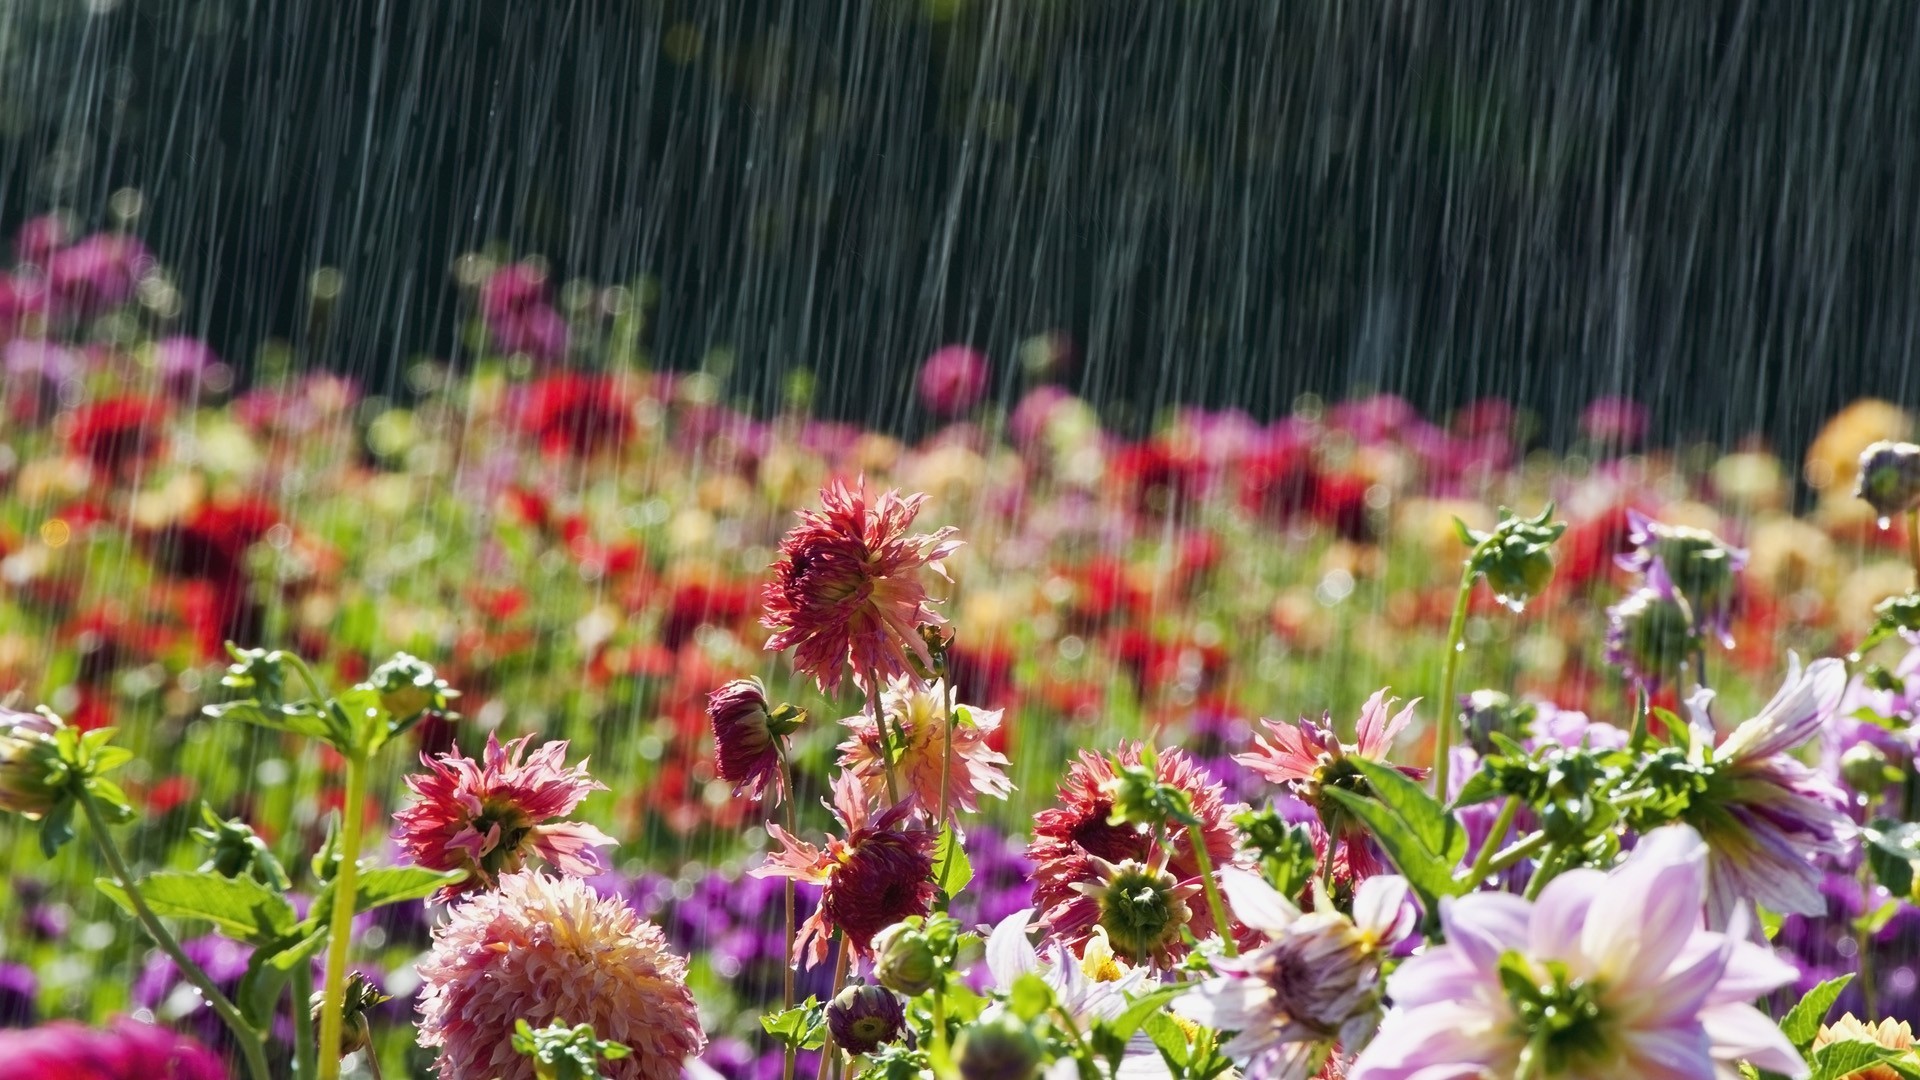 1920x1080 4. april-showers-bring-may-flowers-wallpaper5-600x338